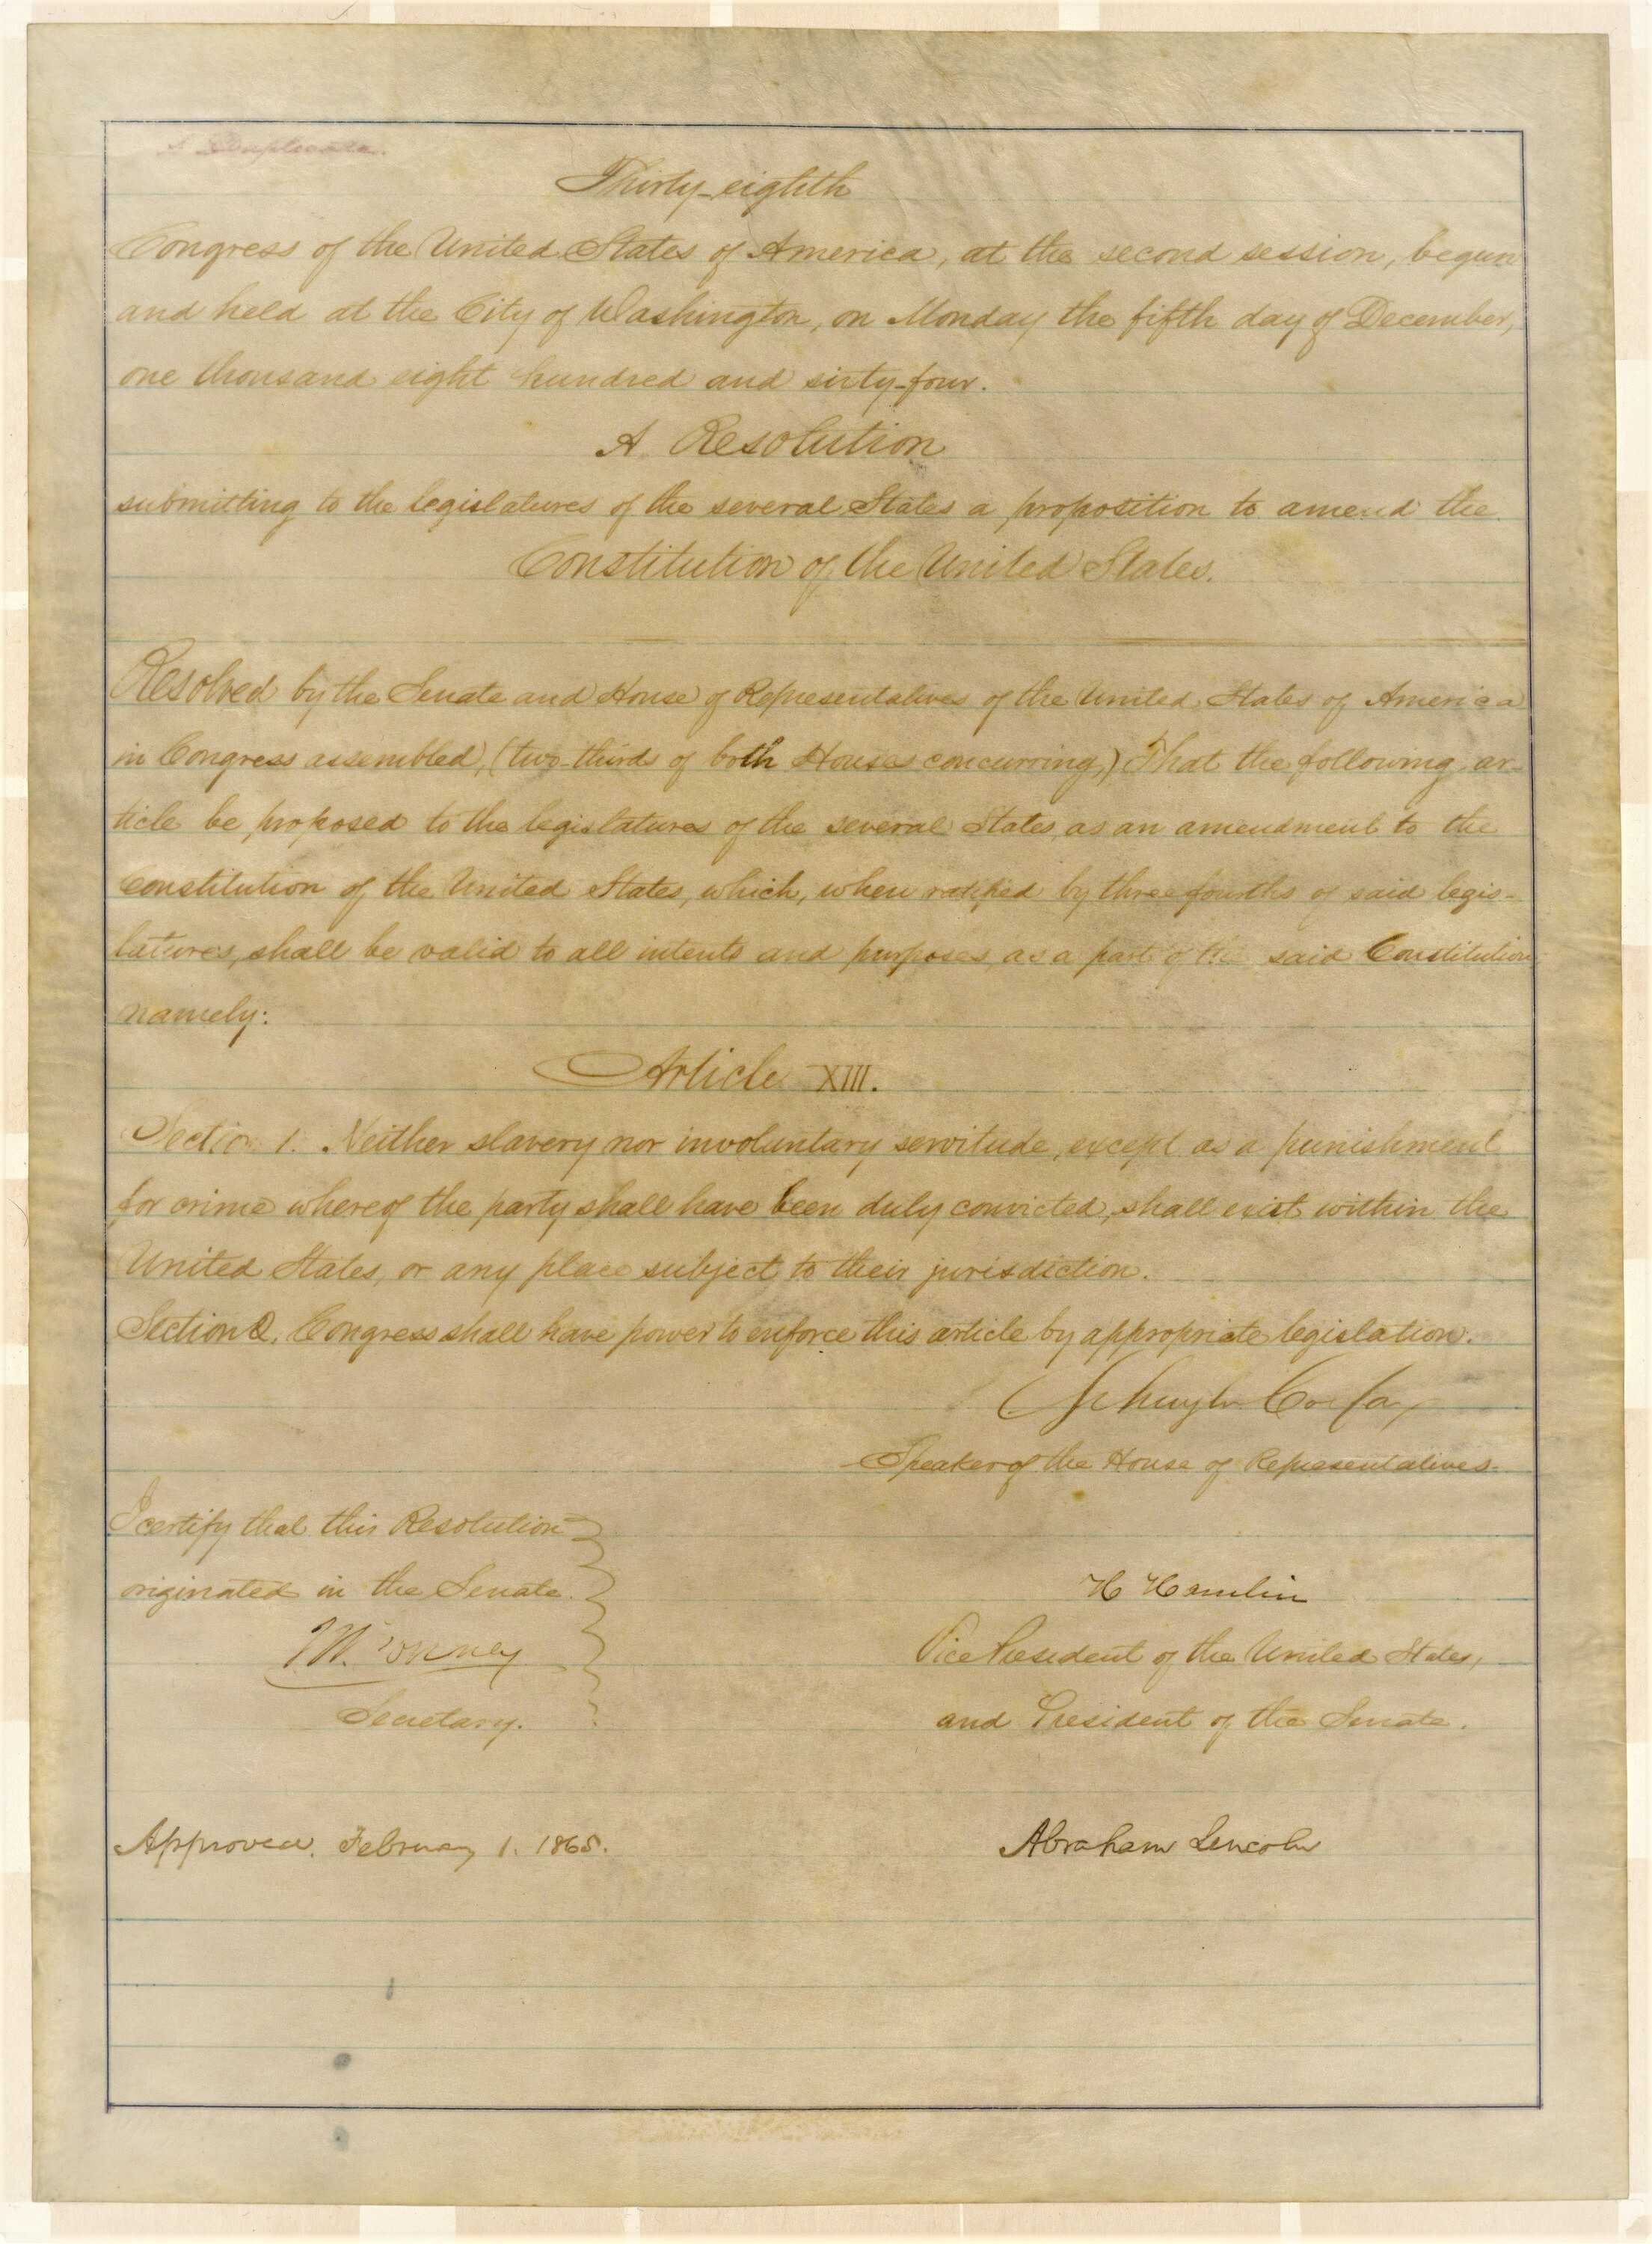 Document image of the 13th Amendment